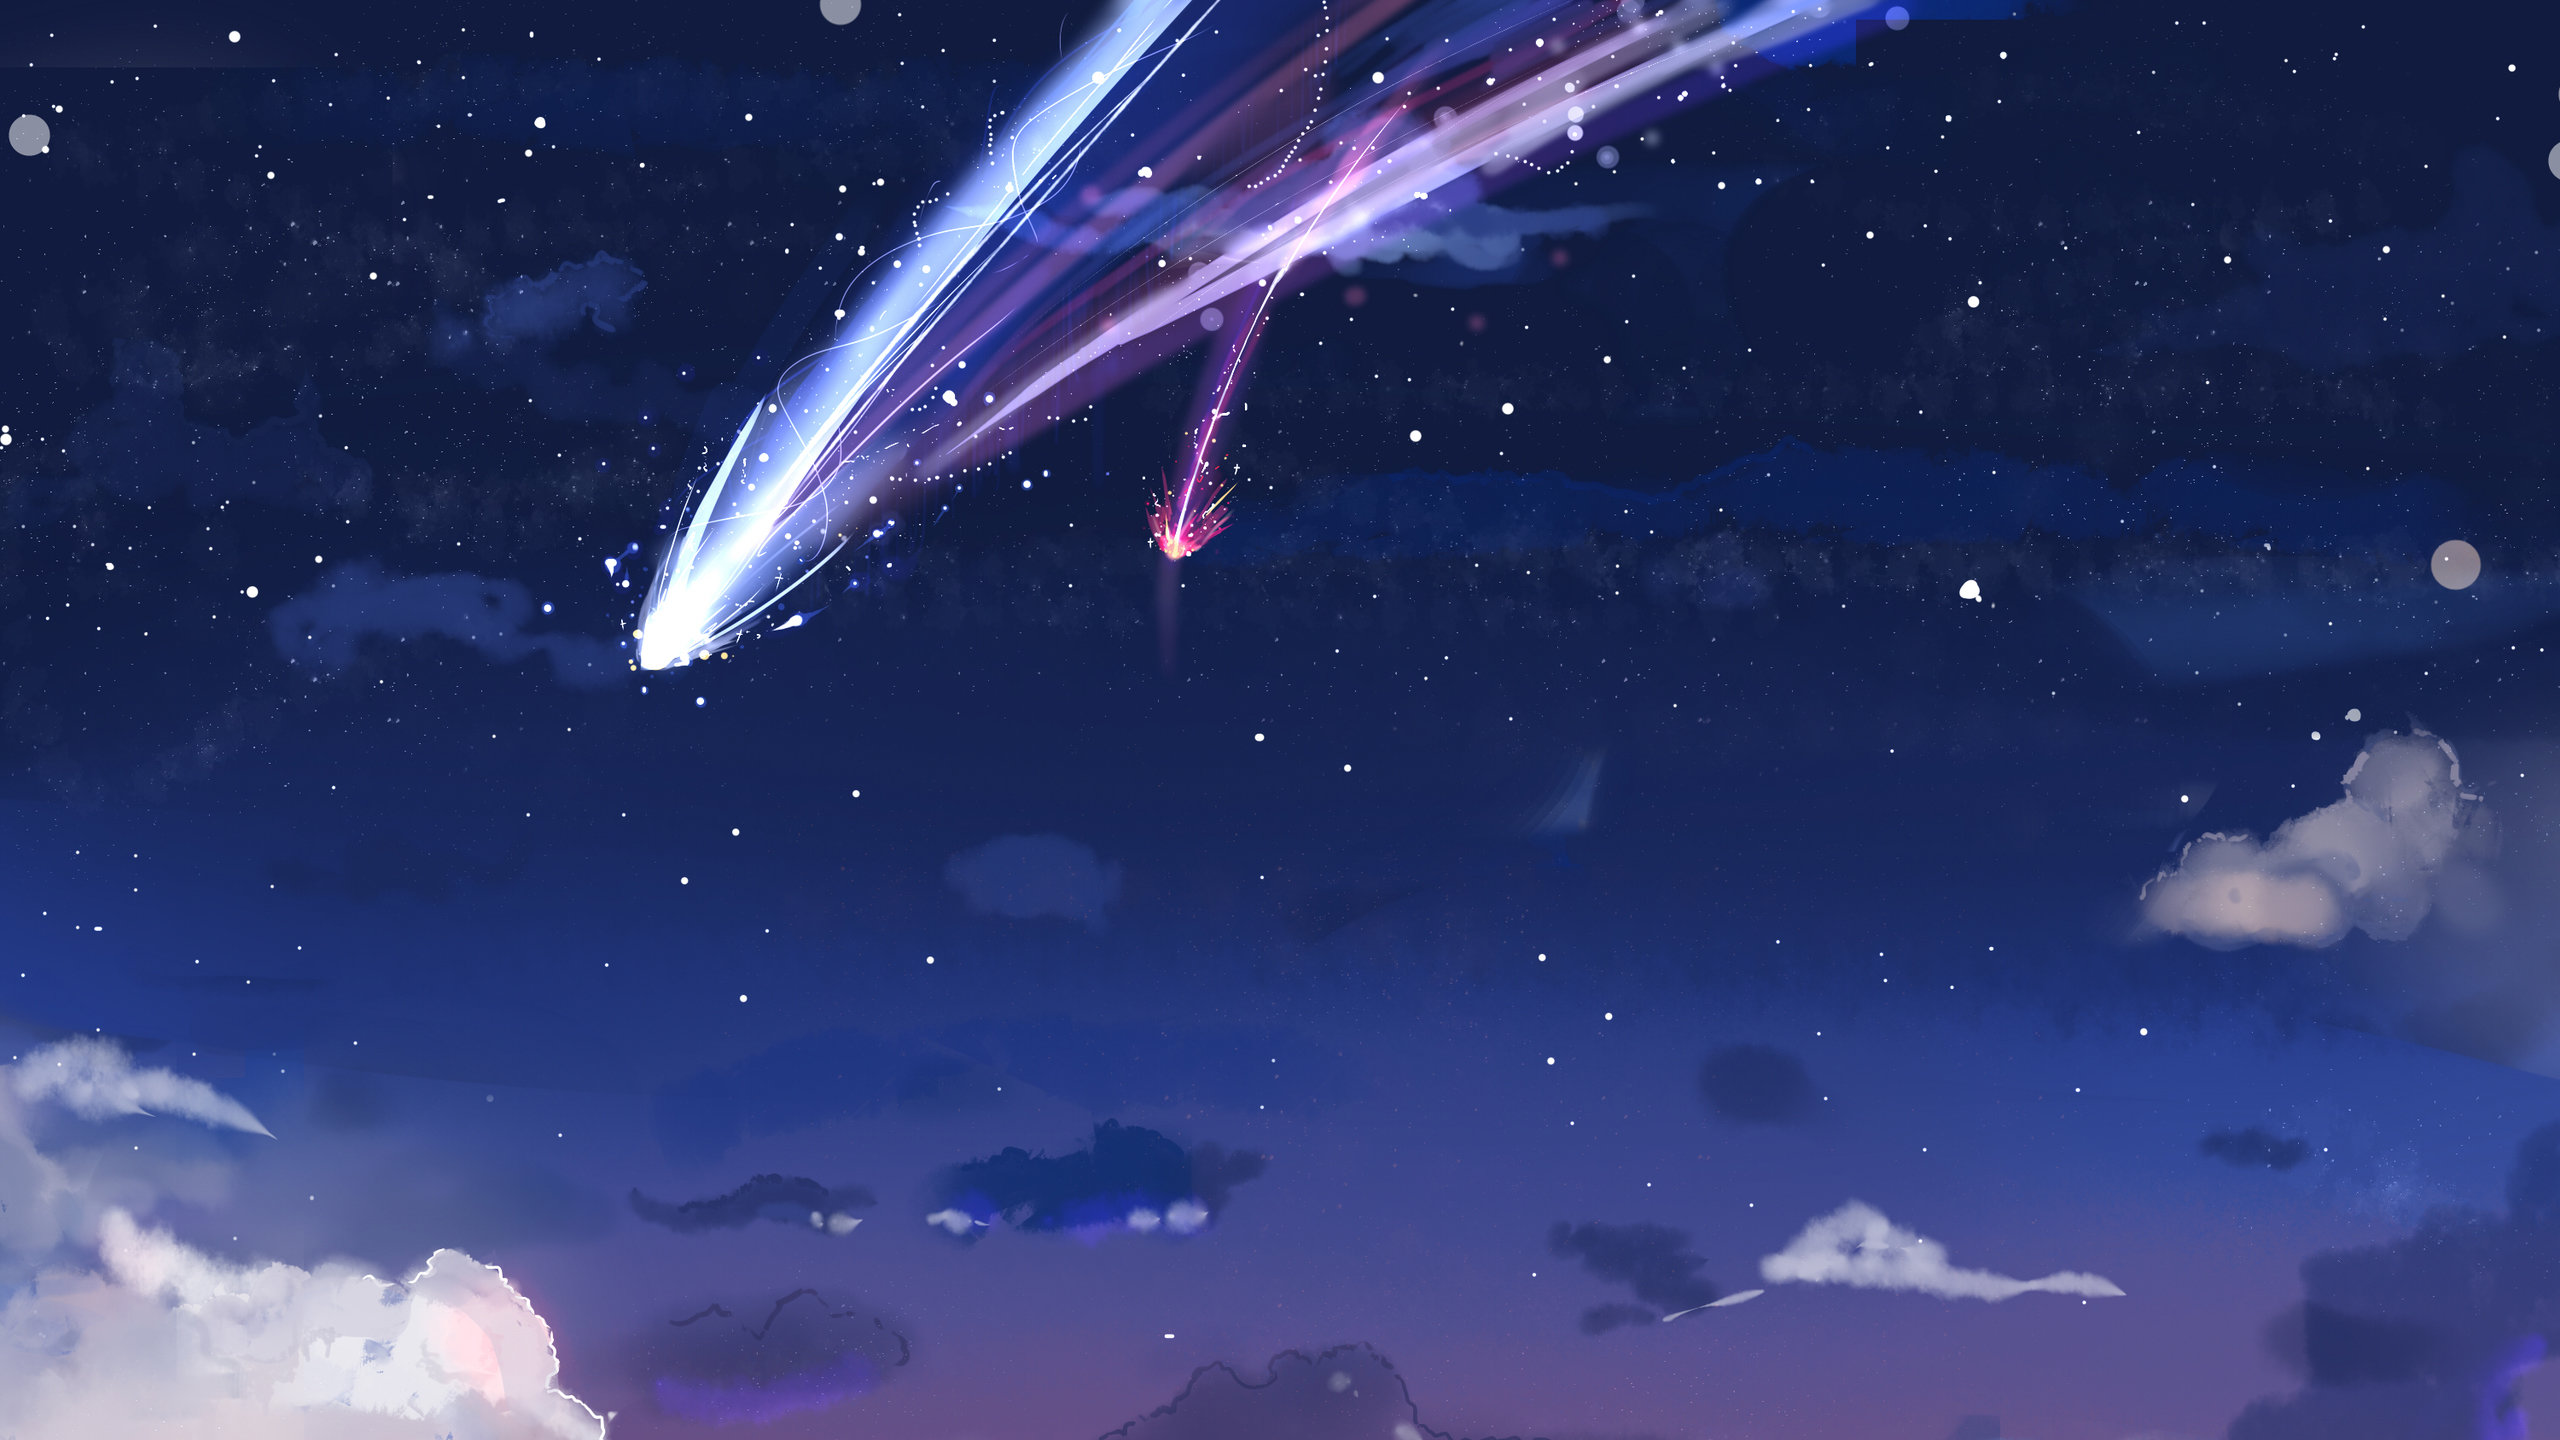 your name wallpaper,sky,outer space,atmosphere,space,universe